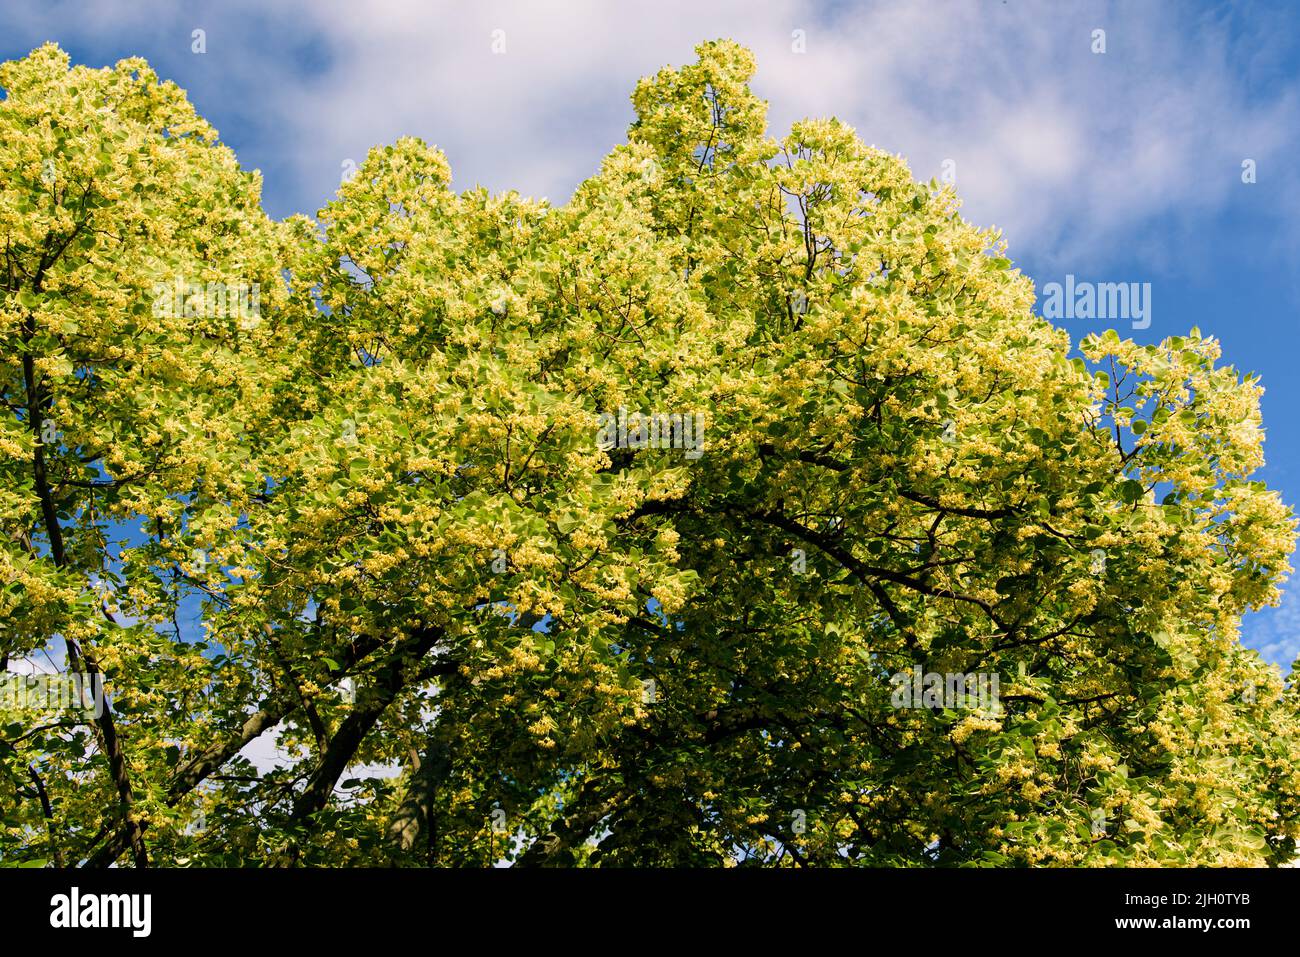 Blooming linden. Lime tree in bloom agaist blue sky. Blossoming basswood on sunny day. Selective focus Stock Photo